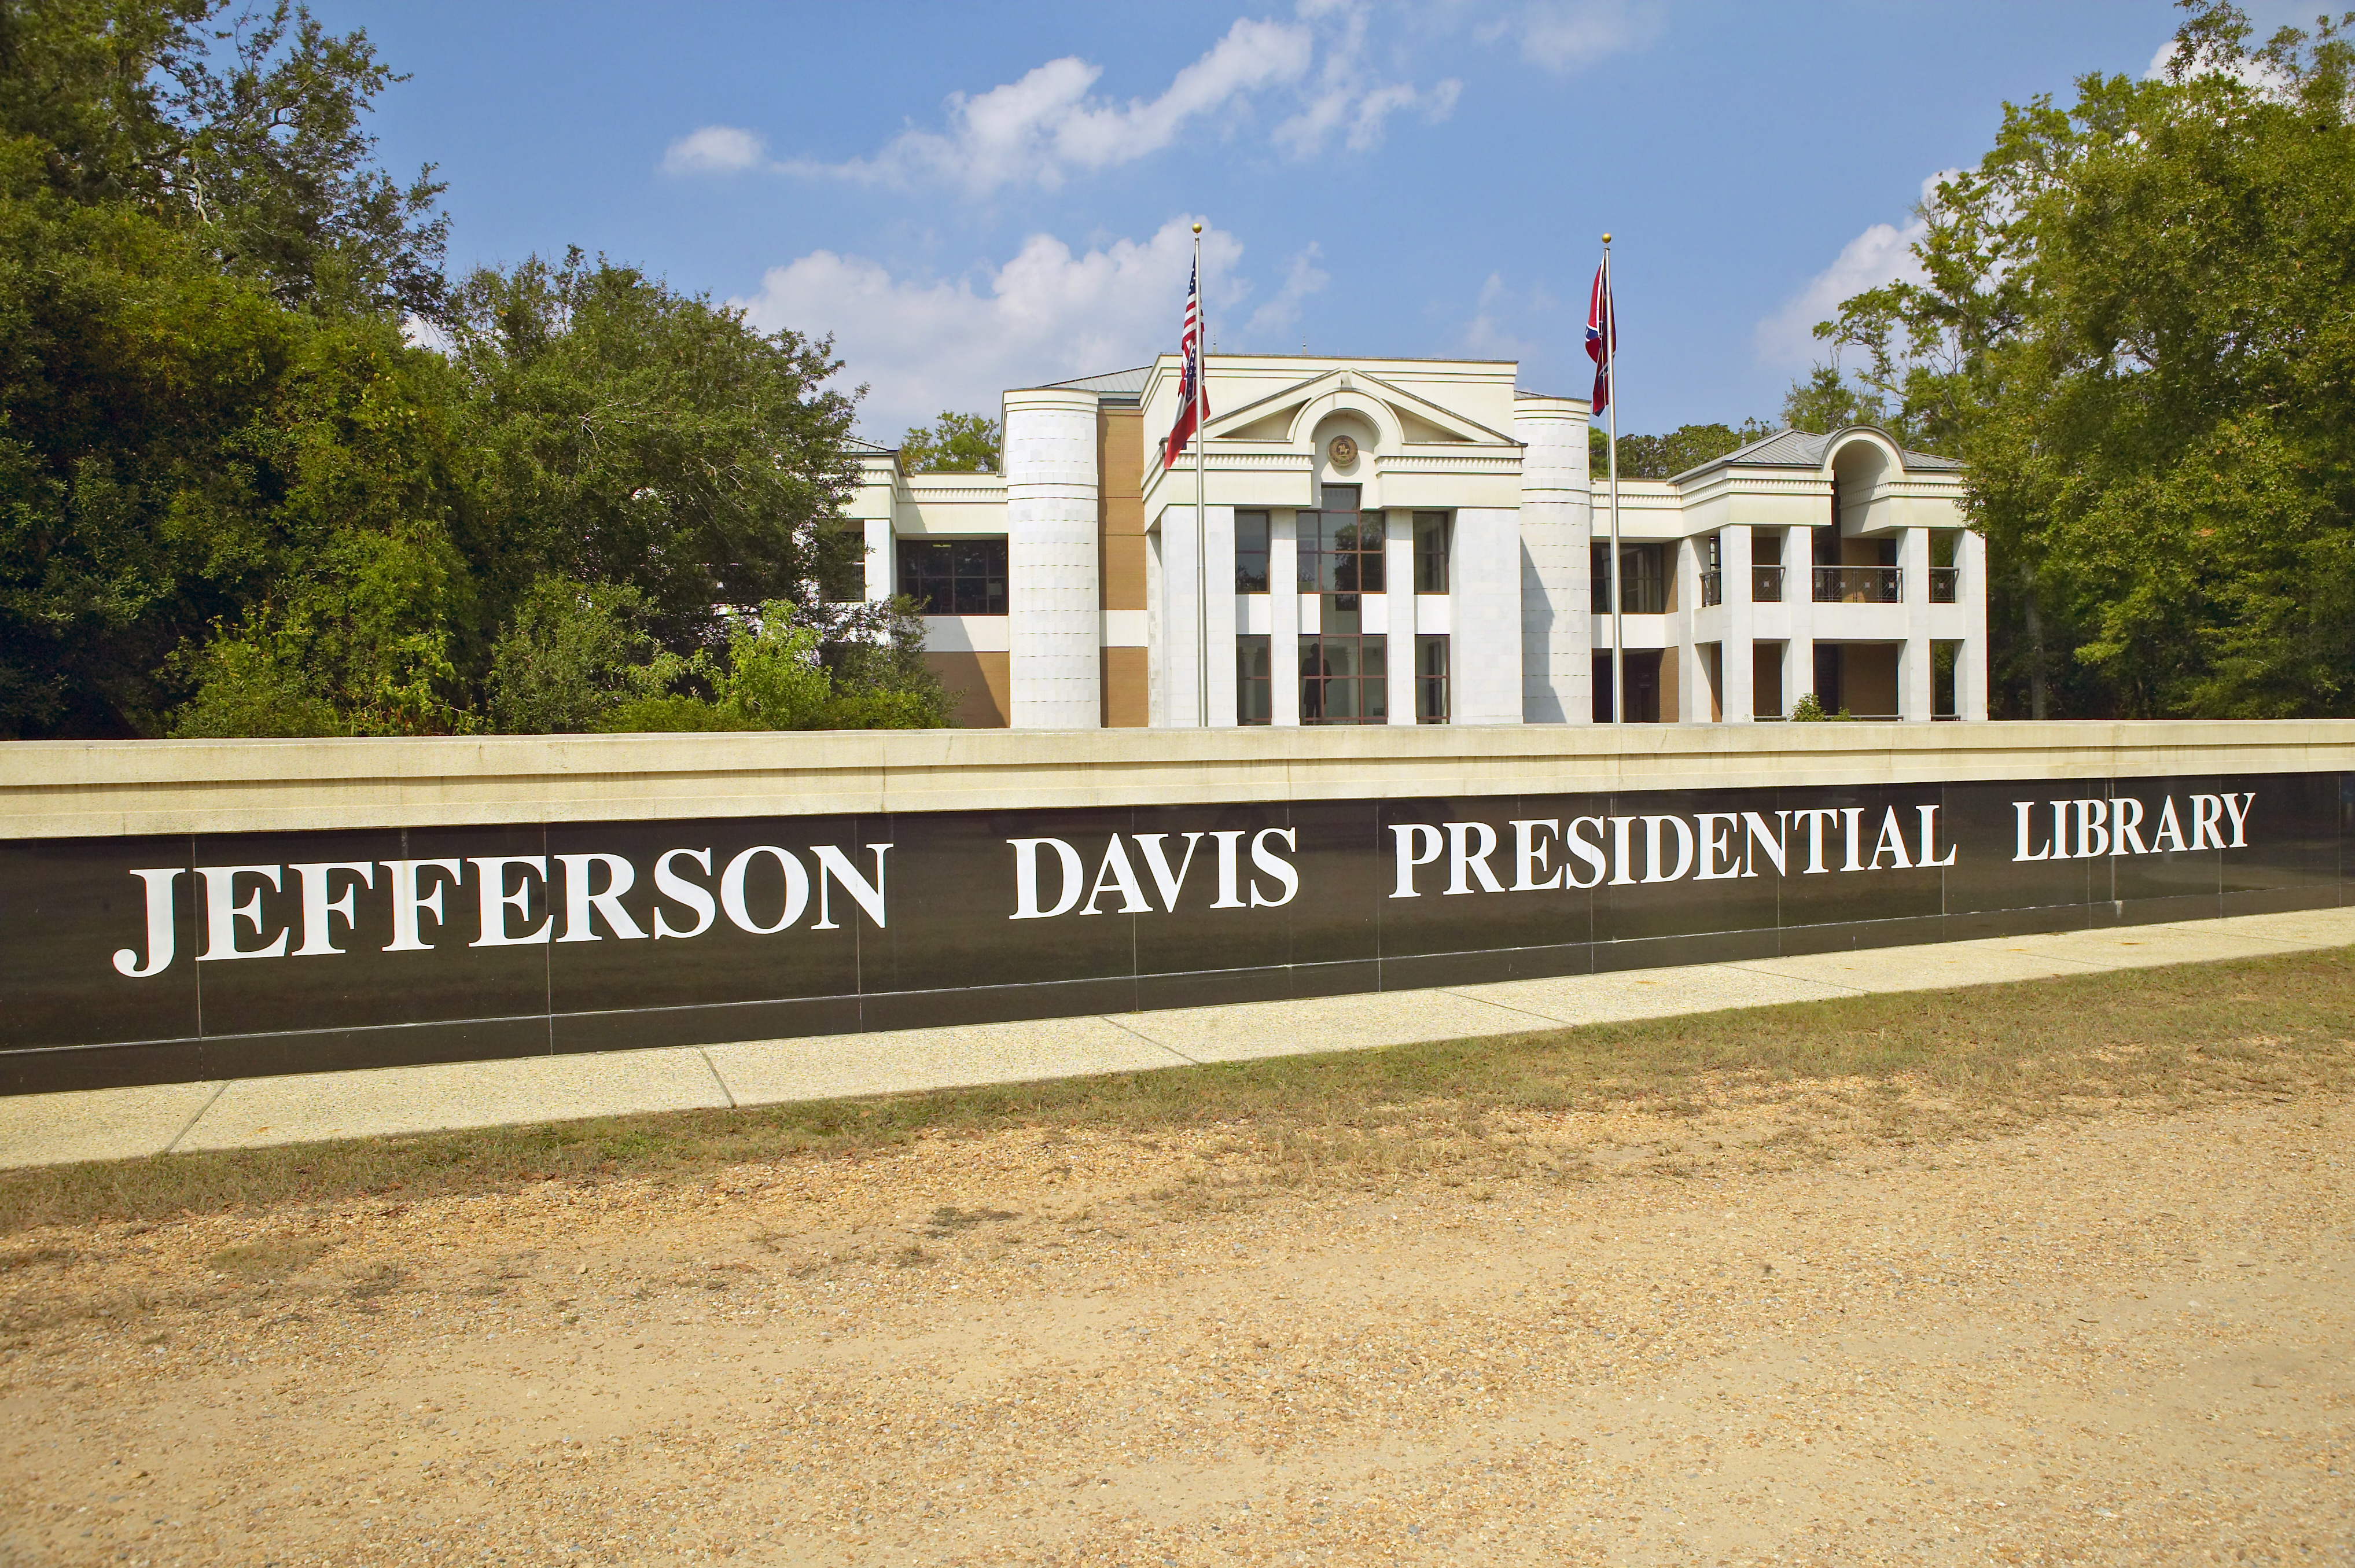 Sign in front of the Jefferson Davis Presidential Library in Biloxi, MS. Visions of America&mdash;UIG via Getty Images (Visions of America&mdash;UIG via Getty Images)